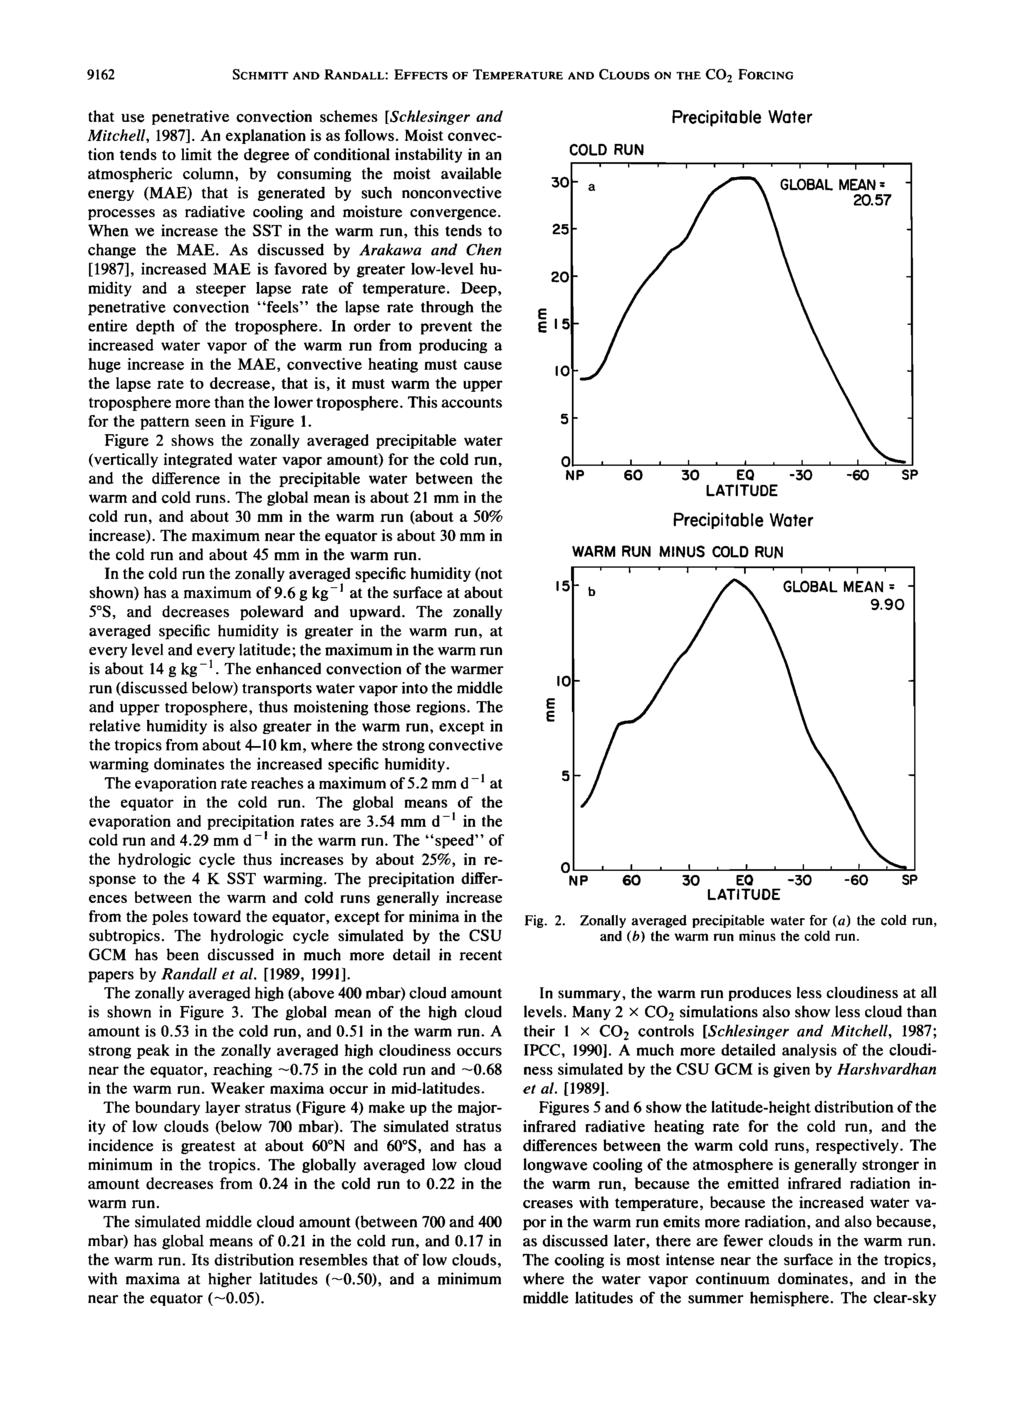 . 9162 SCHMITT AND RANDALL: EFFECTS OF TEMPERATURE AND CLOUDS ON THE CO 2 FORCING that use penetrative convection schemes [Schlesinger and Mitchell, 1987]. An explanation is as follows.